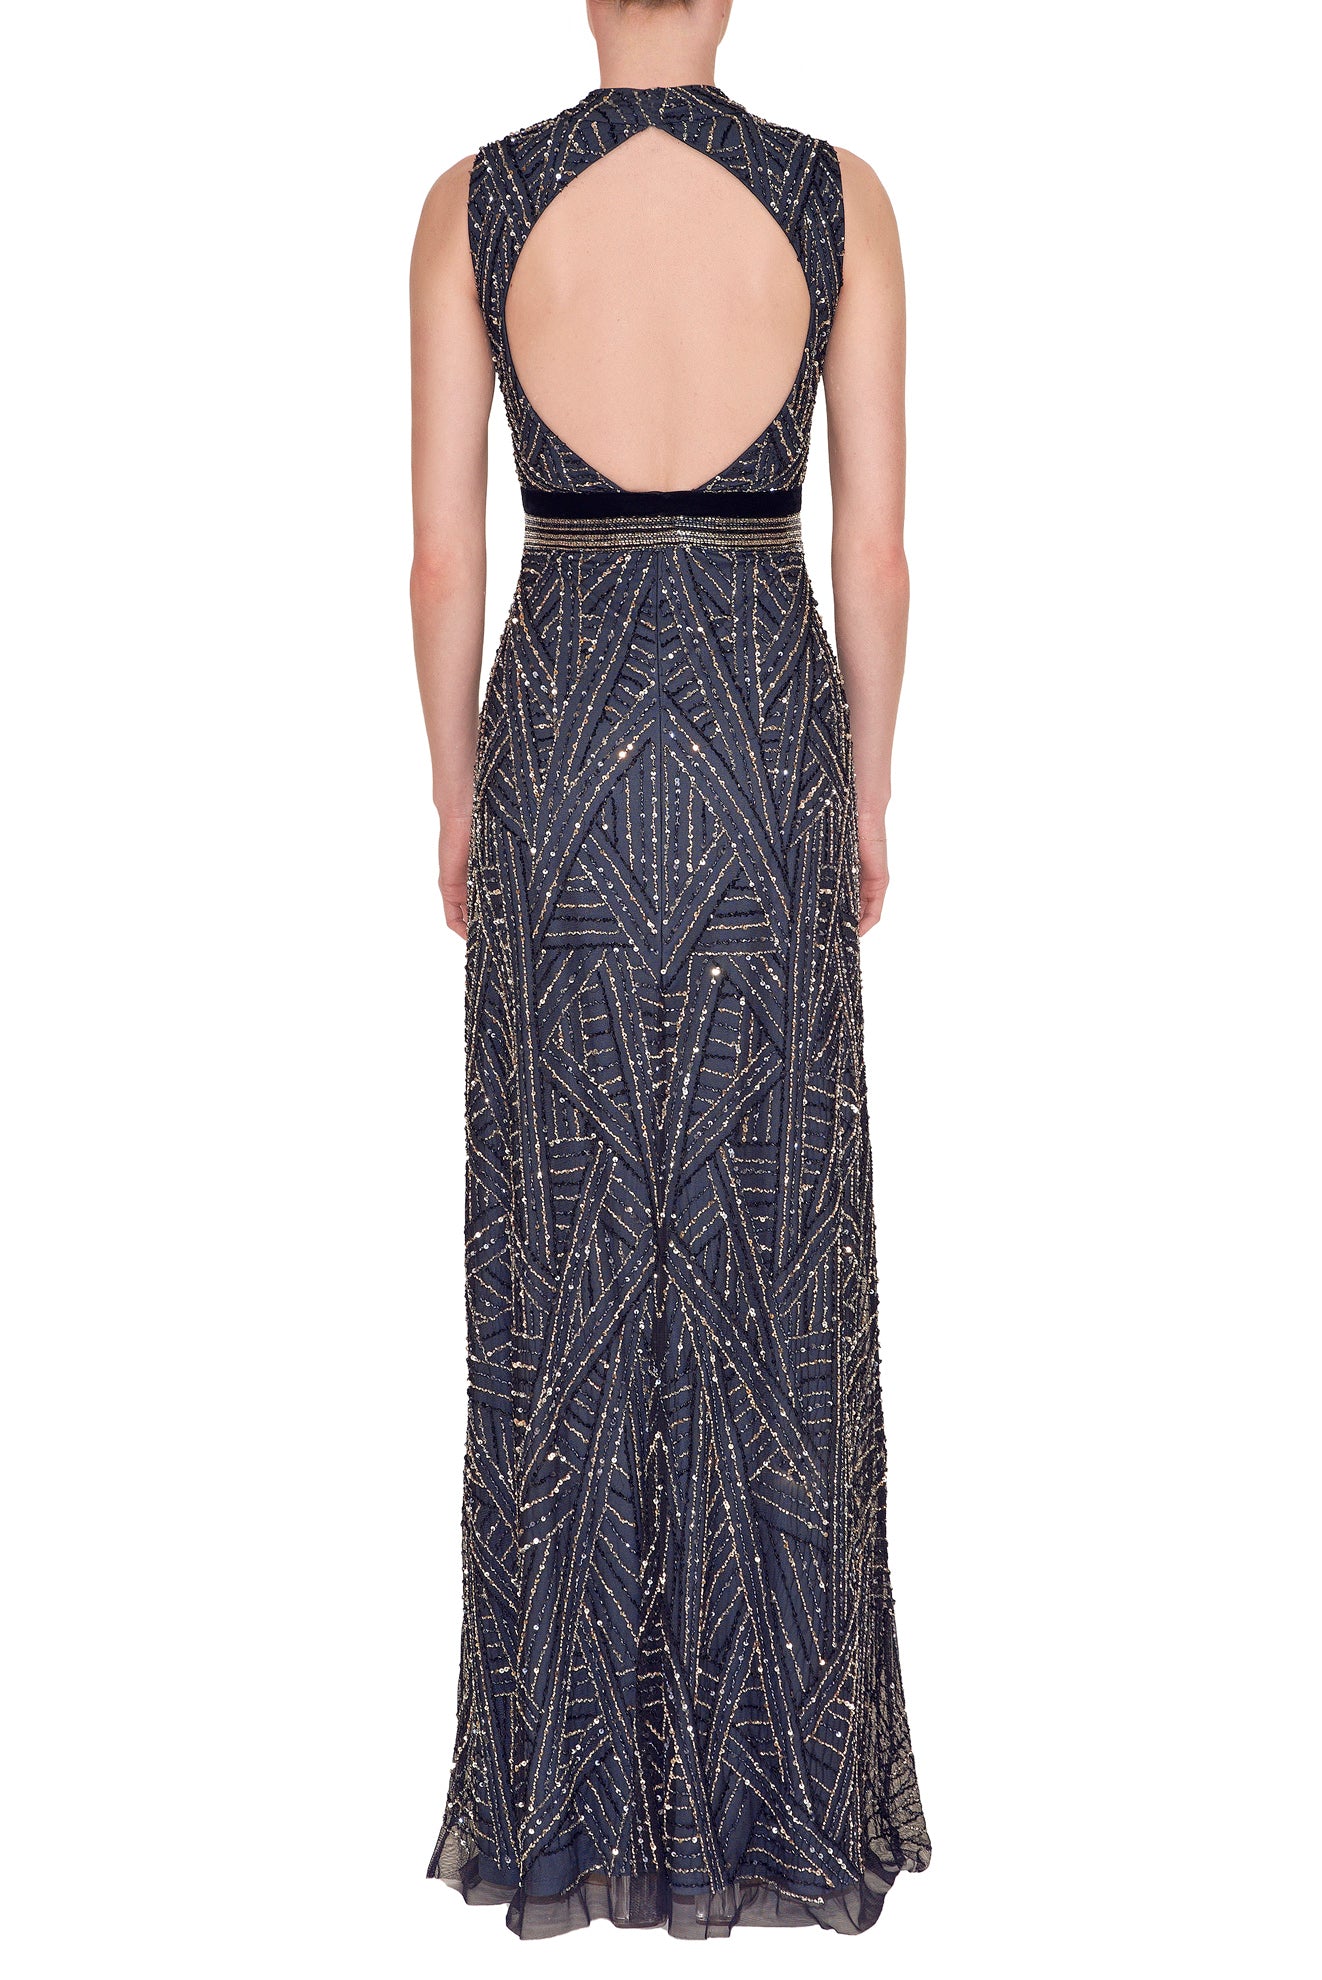 JEWEL NECK SLEEVELESS BEADED GOWN WITH KEYHOLE BACK DETAIL